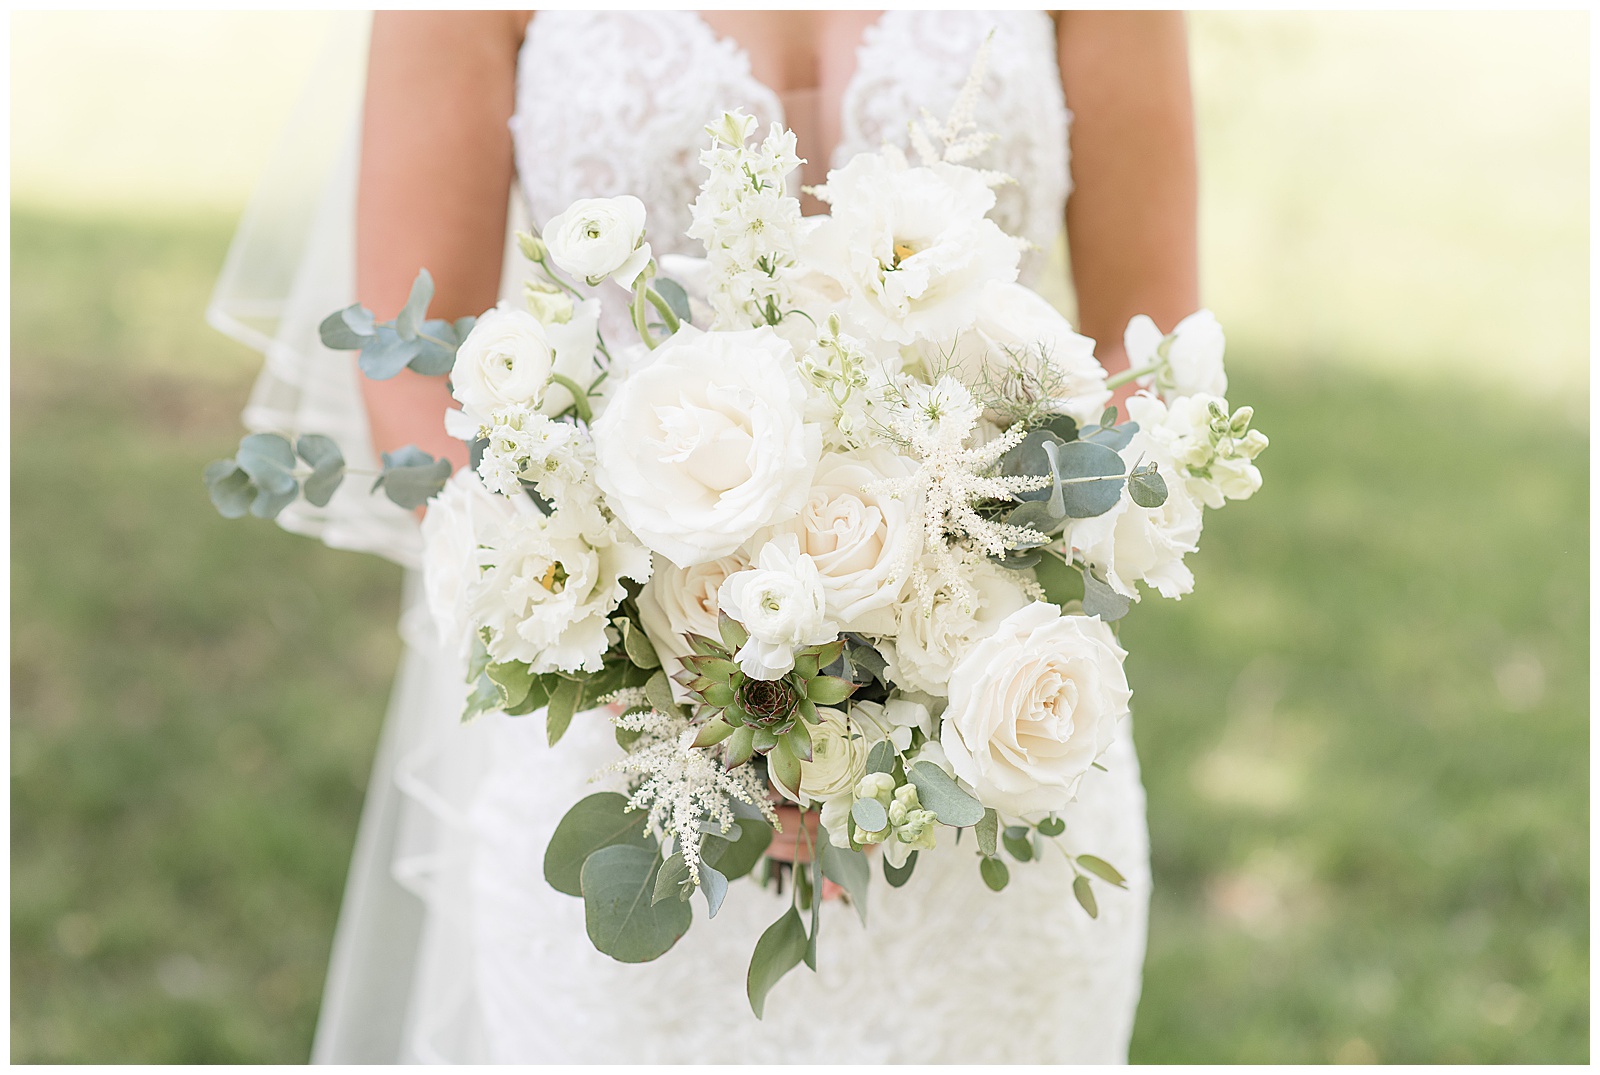 close up photo of bride's bouquet filled with white roses, other white flowers, and silver dollar eucalyptus